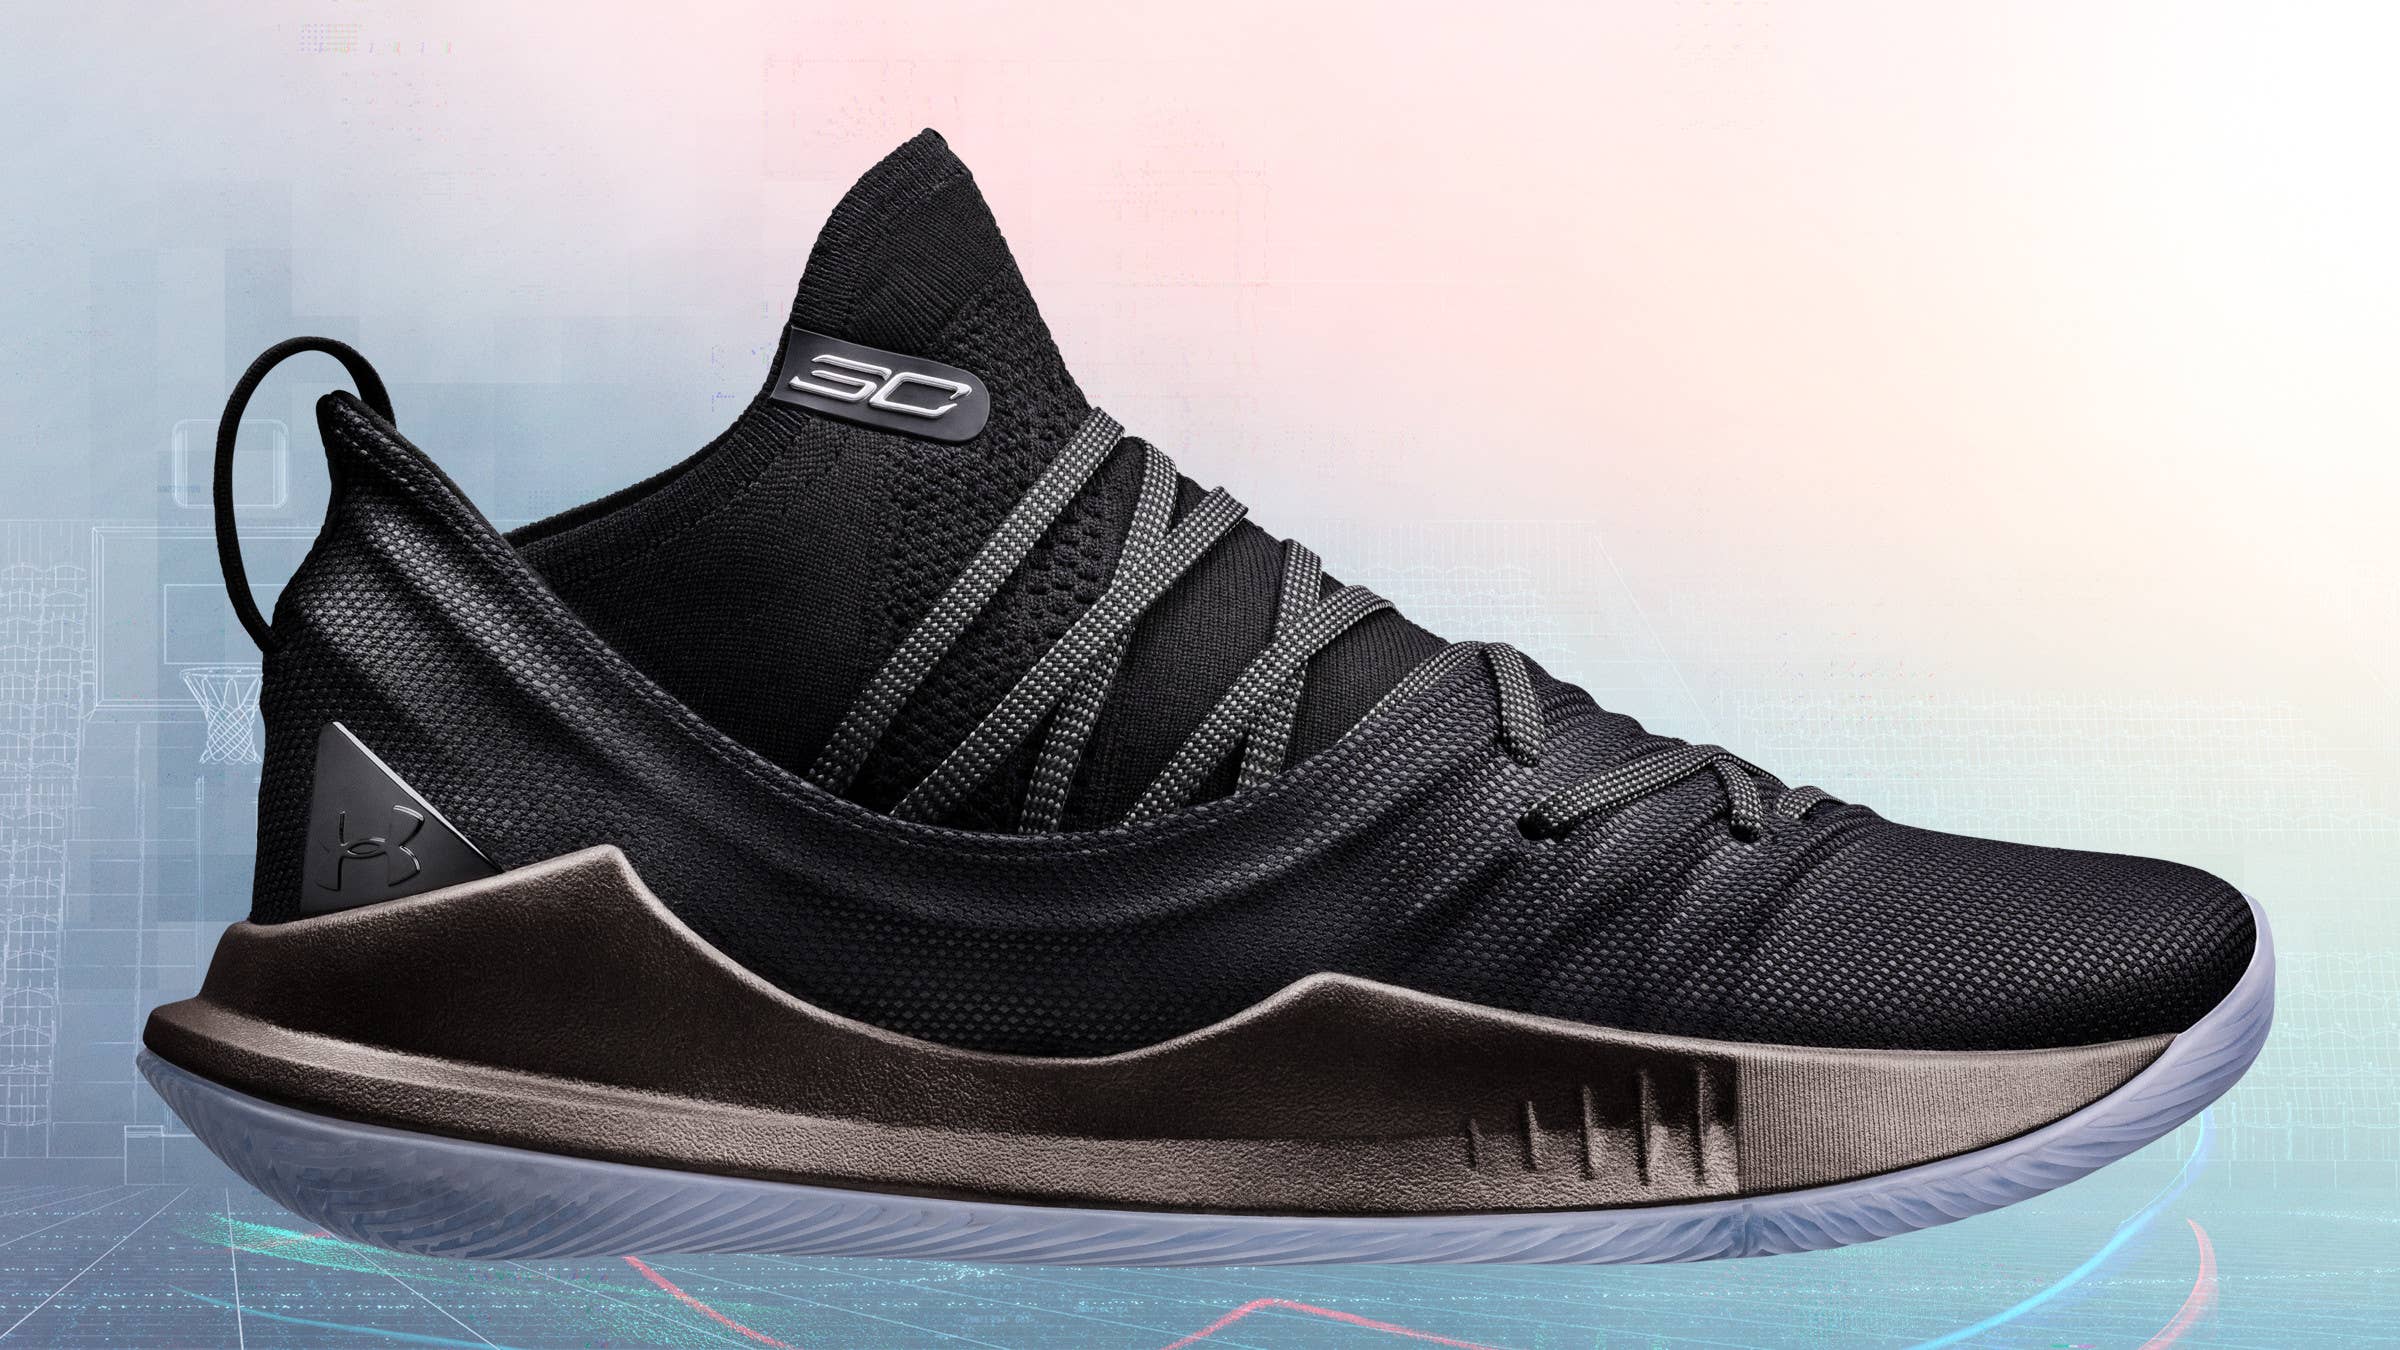 Under Armour Curry 5 'Pi Day' (Lateral)